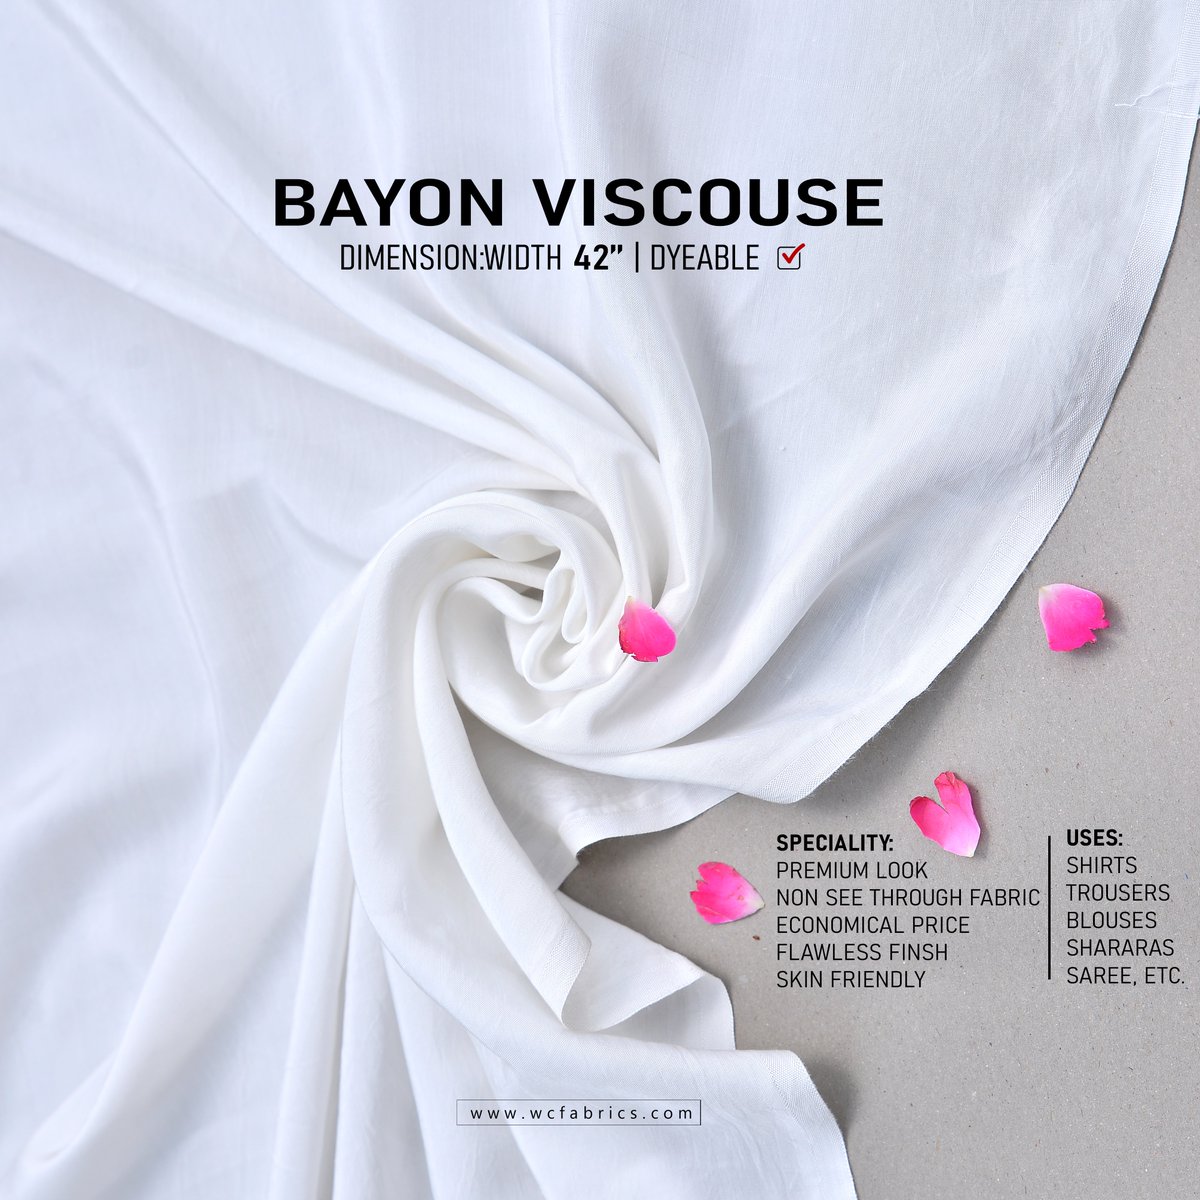 'Indulge in Elegance Bayon Viscose 42' Width, now available in all colors. 
Elevate your creations with the perfect hue!'
#WhiteCentreFabrics 
#MagentaMagic